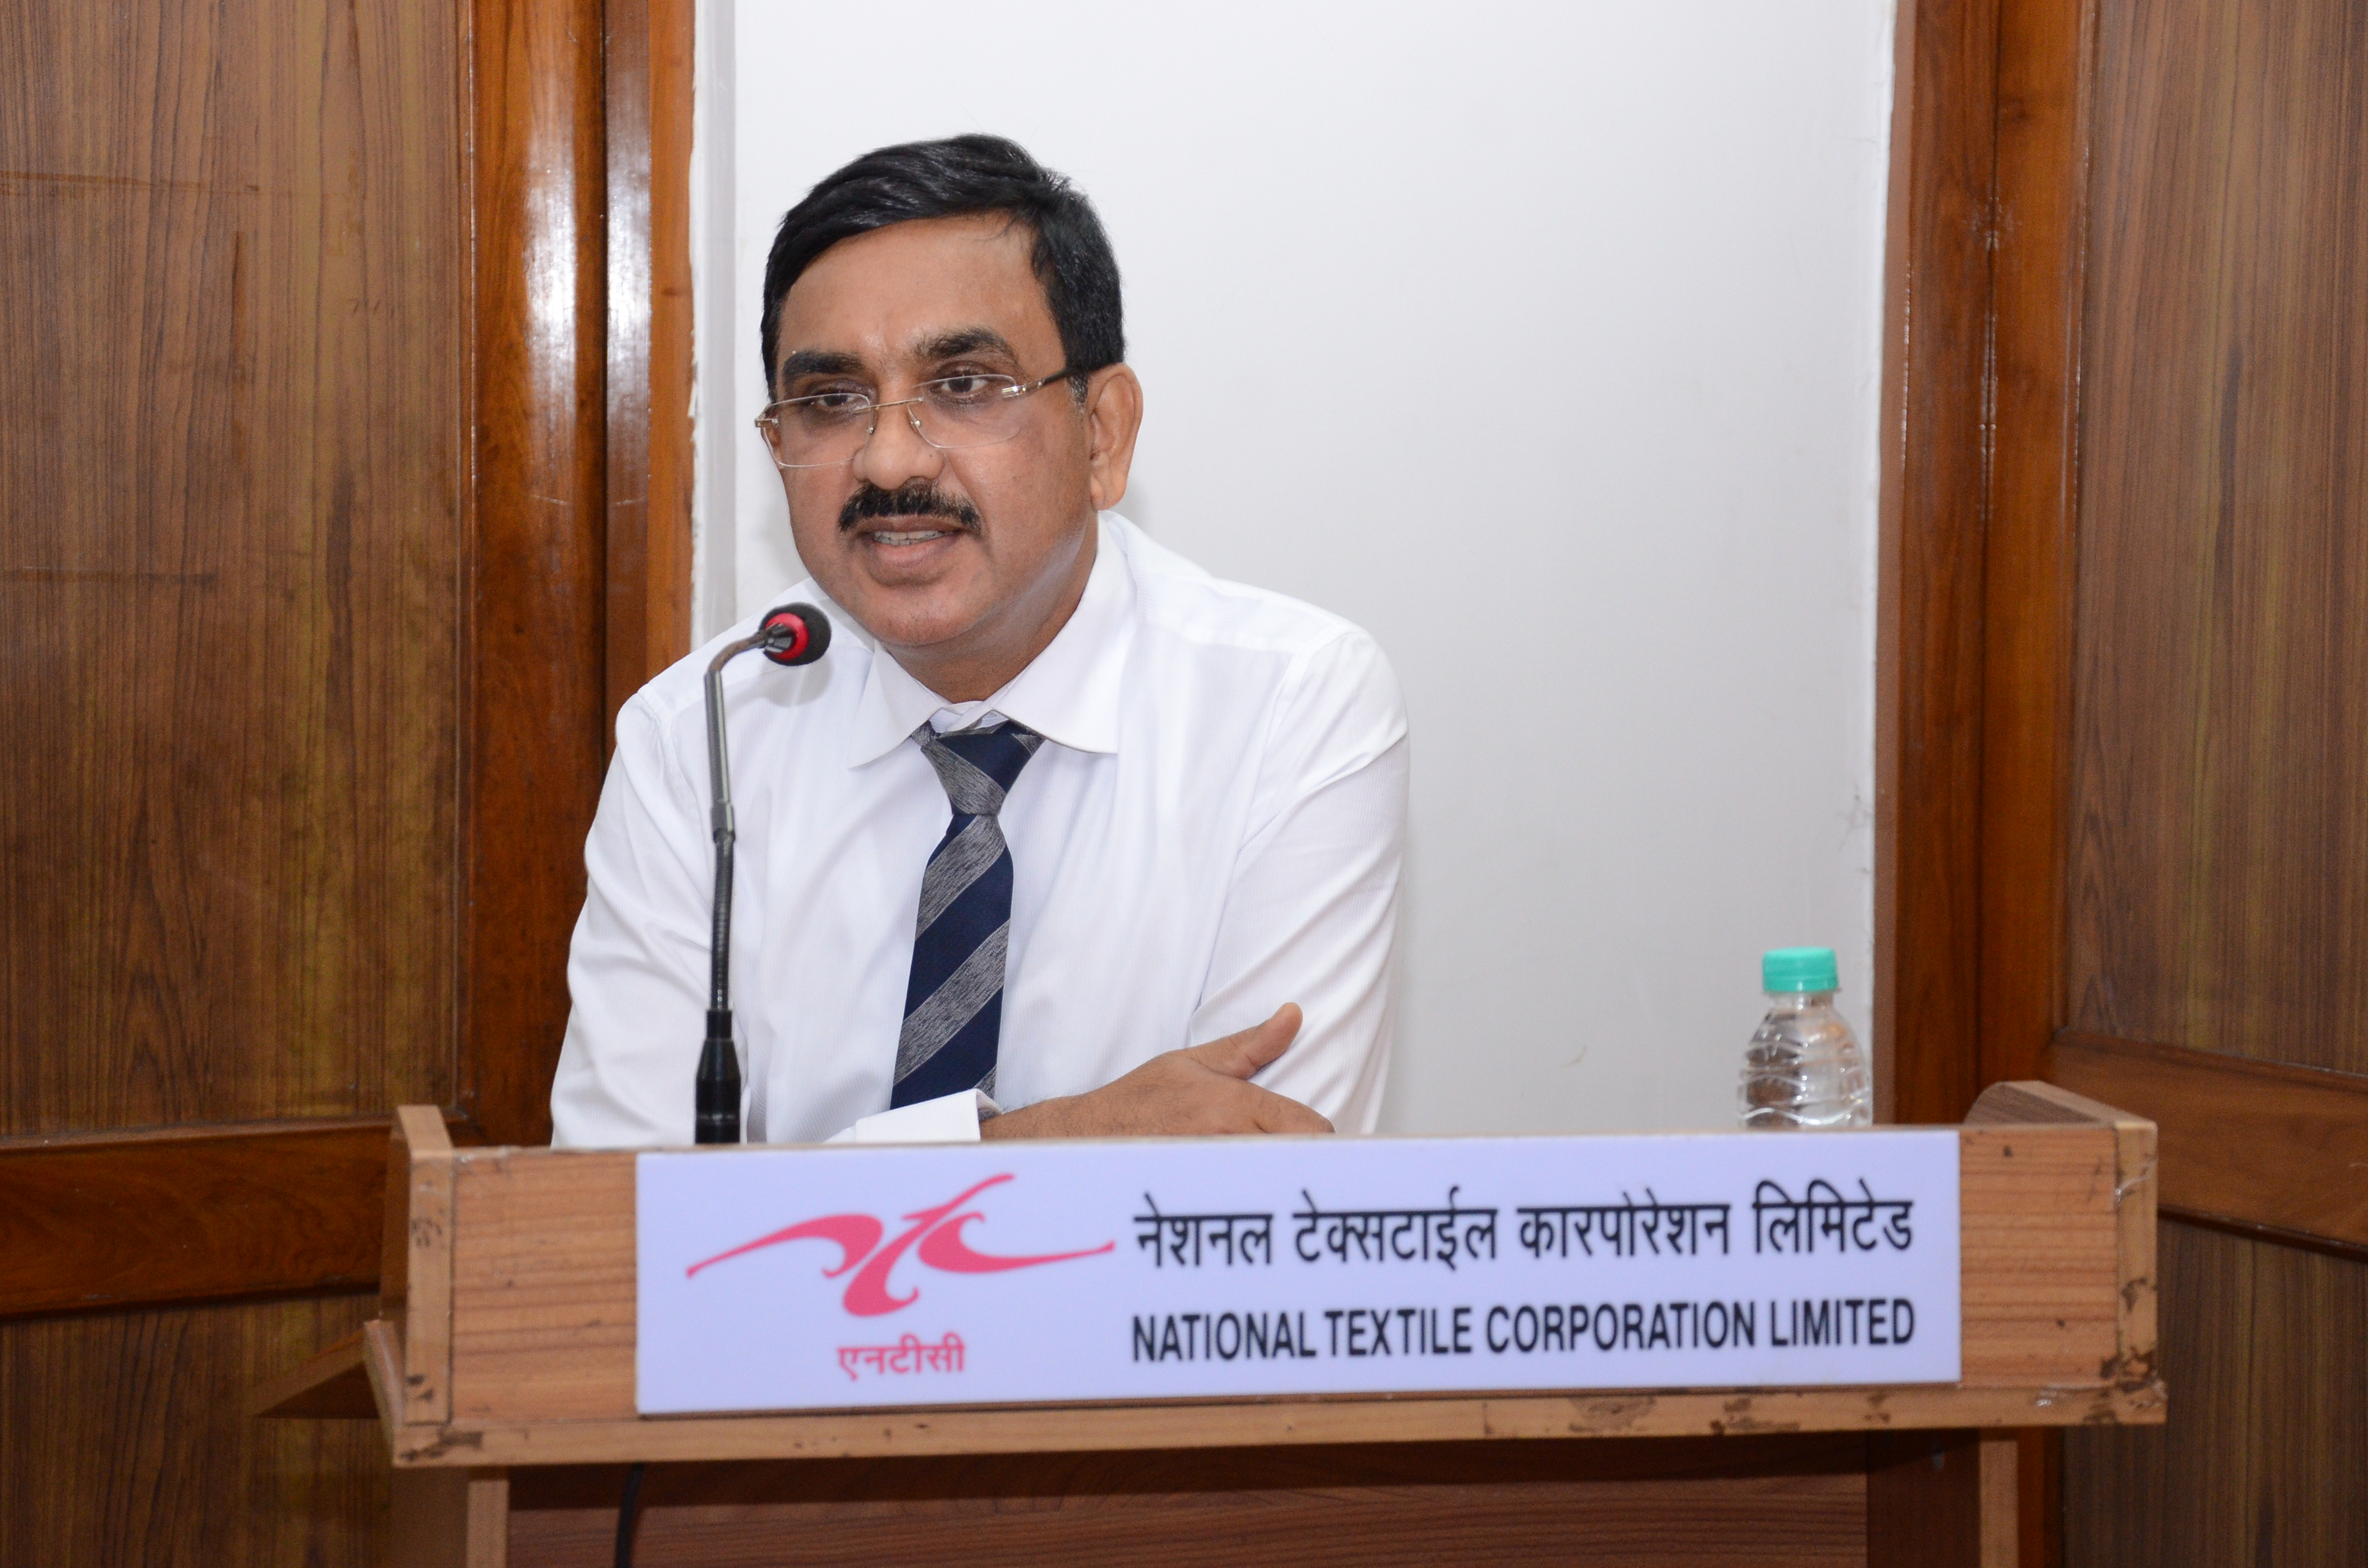 Honorable Chairman and Managing Director Shri P.C. Vaish expressing his views on this occasion.